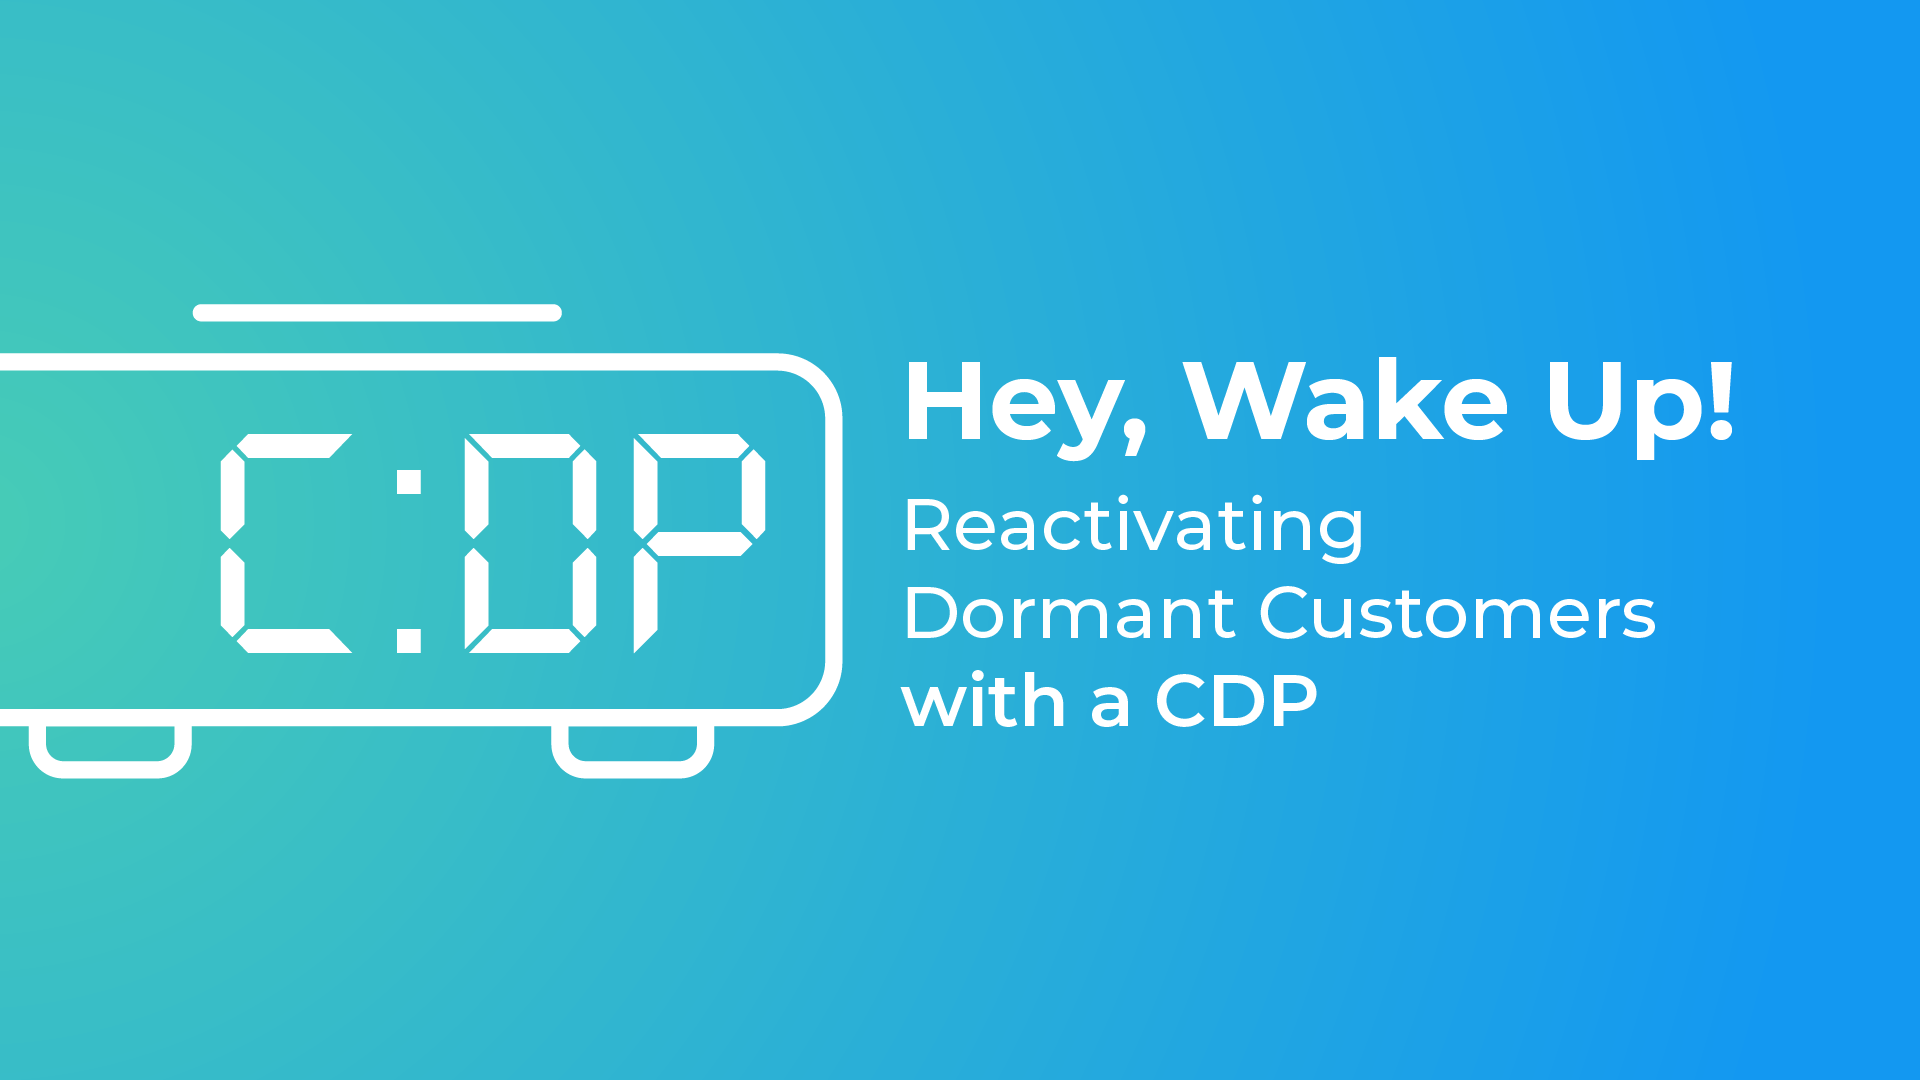 Hey, Wake Up! Reactivating Dormant Customers with a CDP